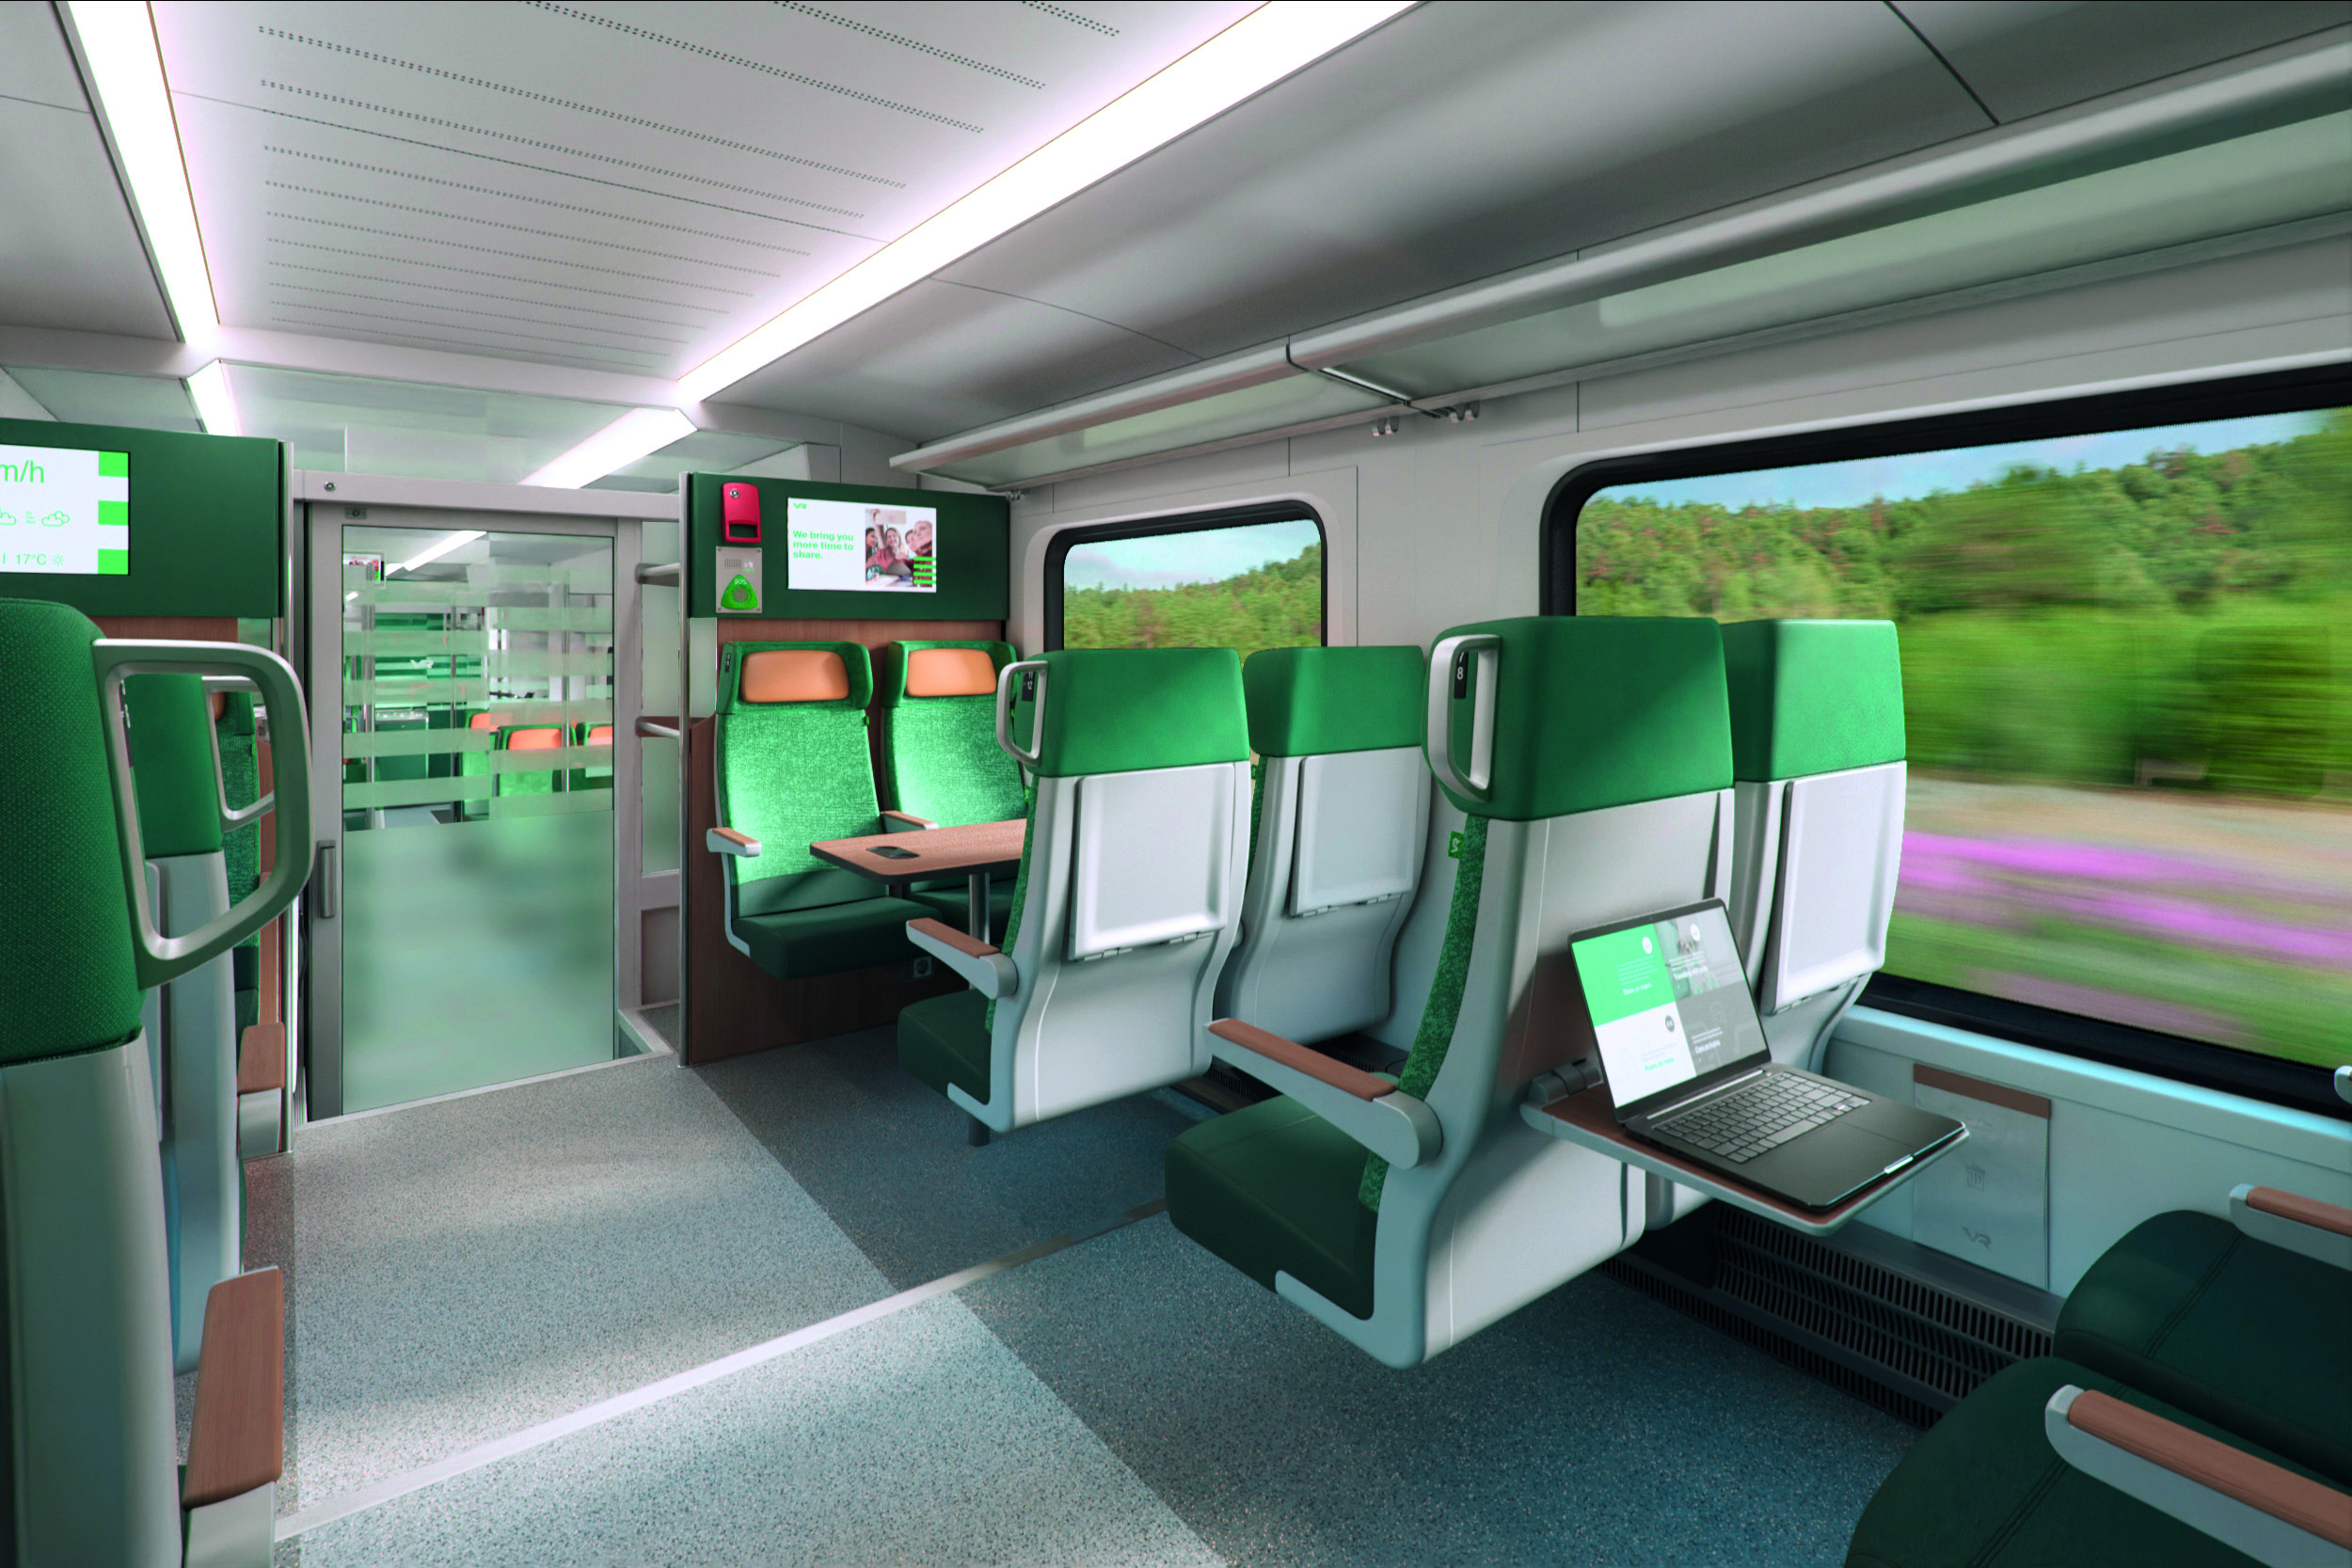 Welcome, commuter trains! VR